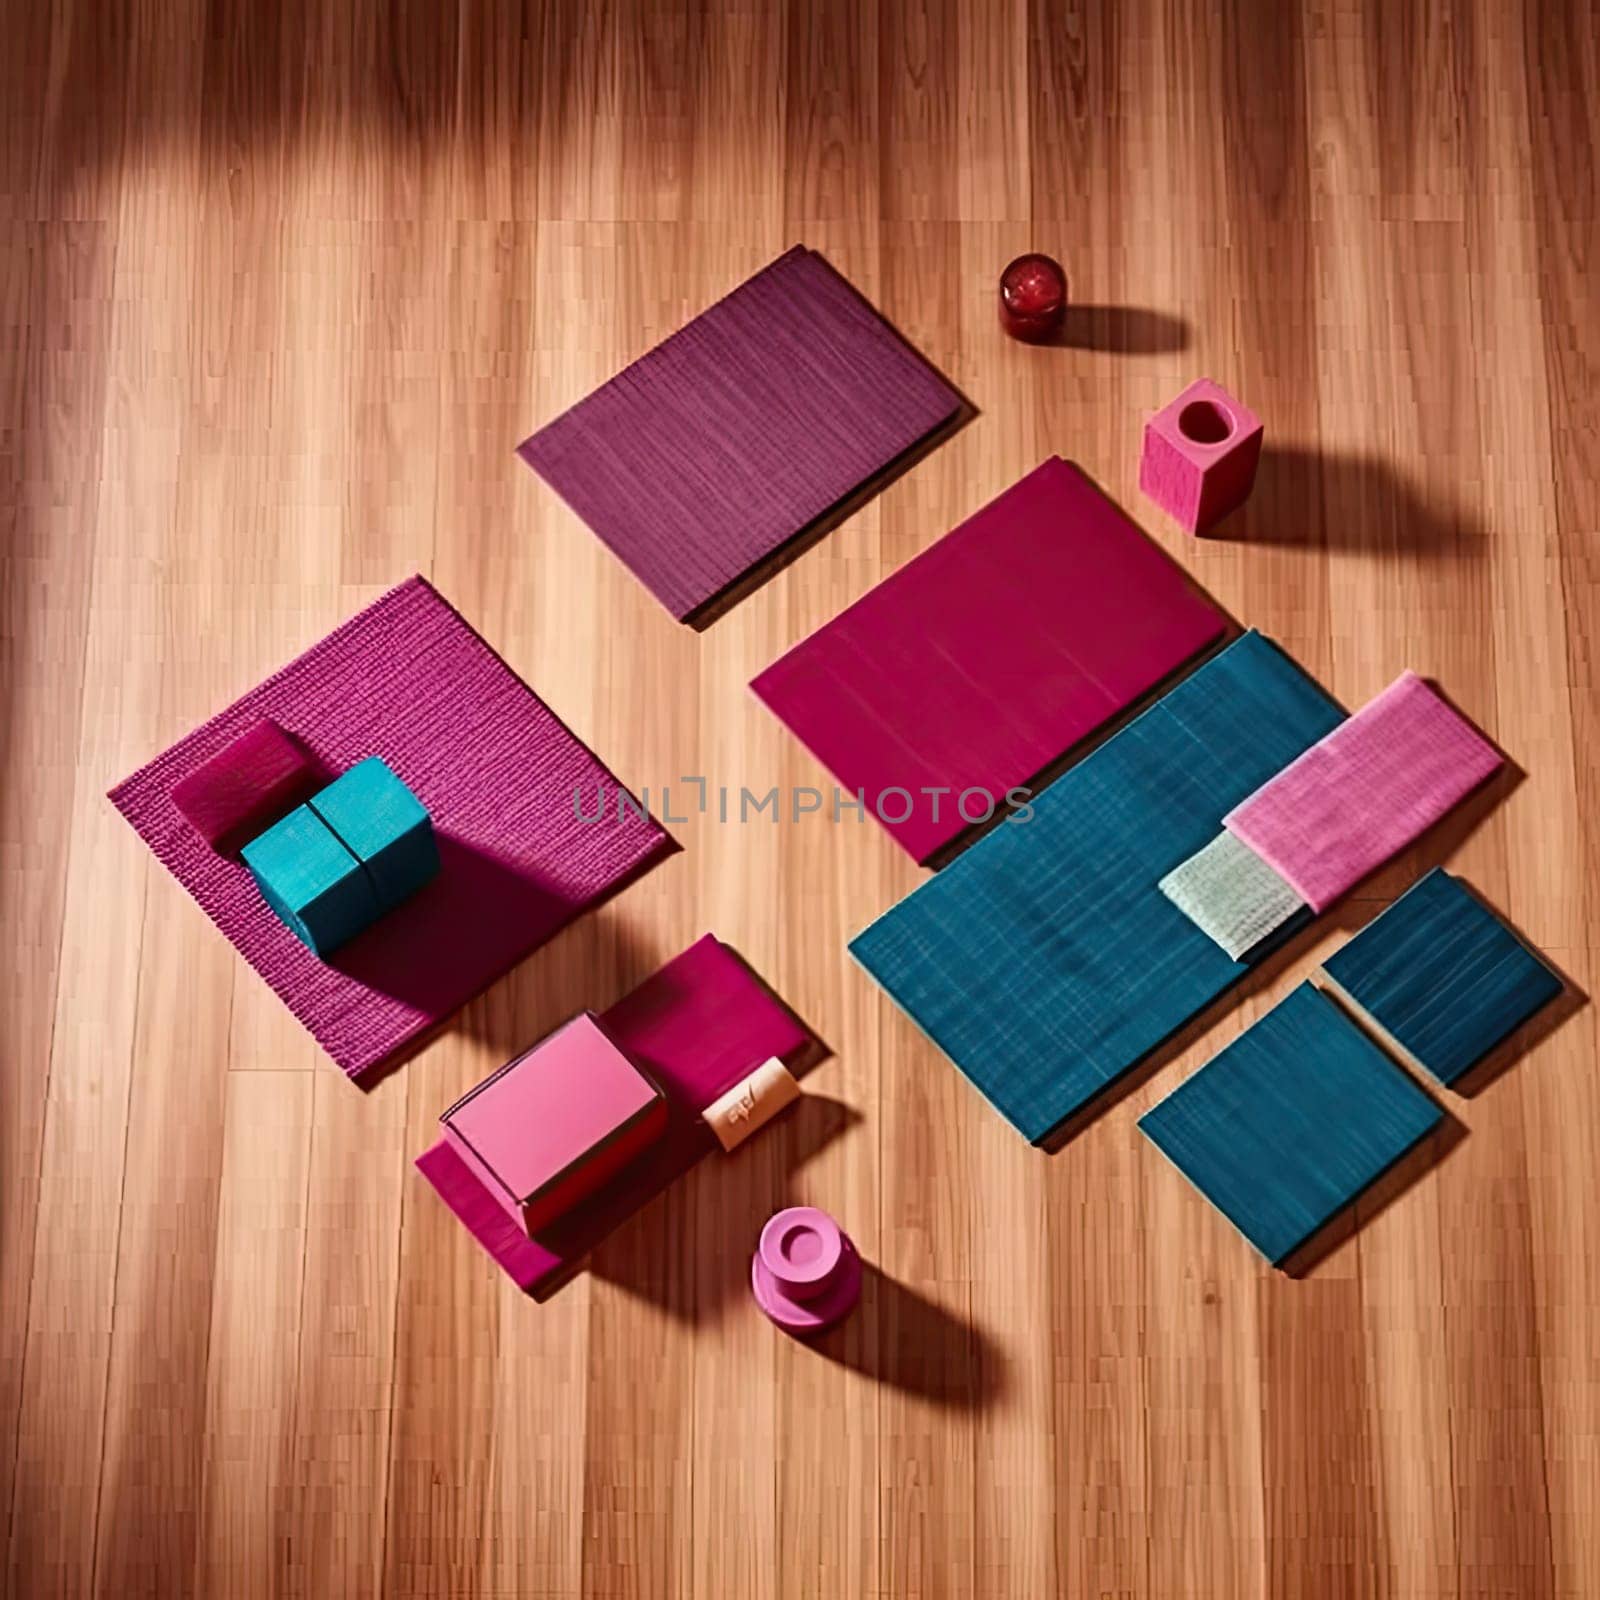 Colorful yoga mats on a wooden floor in a fitness studio (ID: 001570)